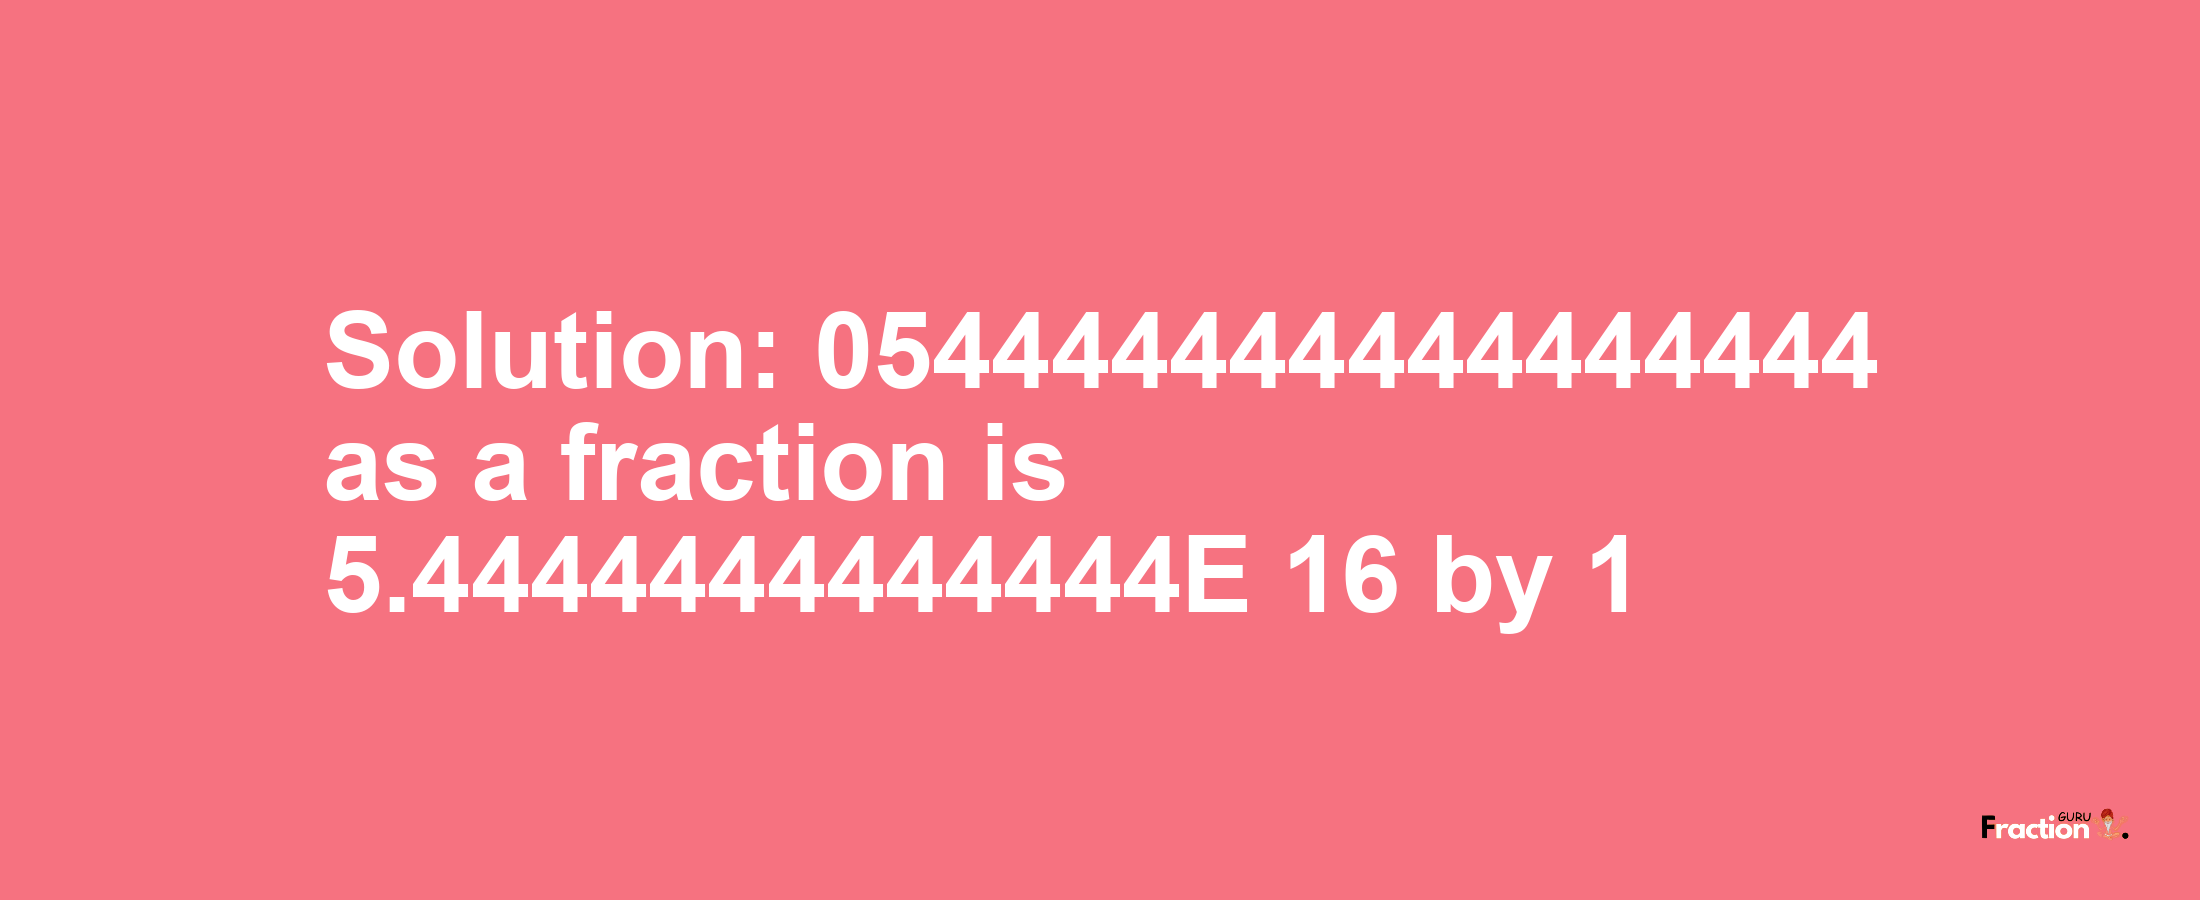 Solution:054444444444444444 as a fraction is 5.4444444444444E+16/1